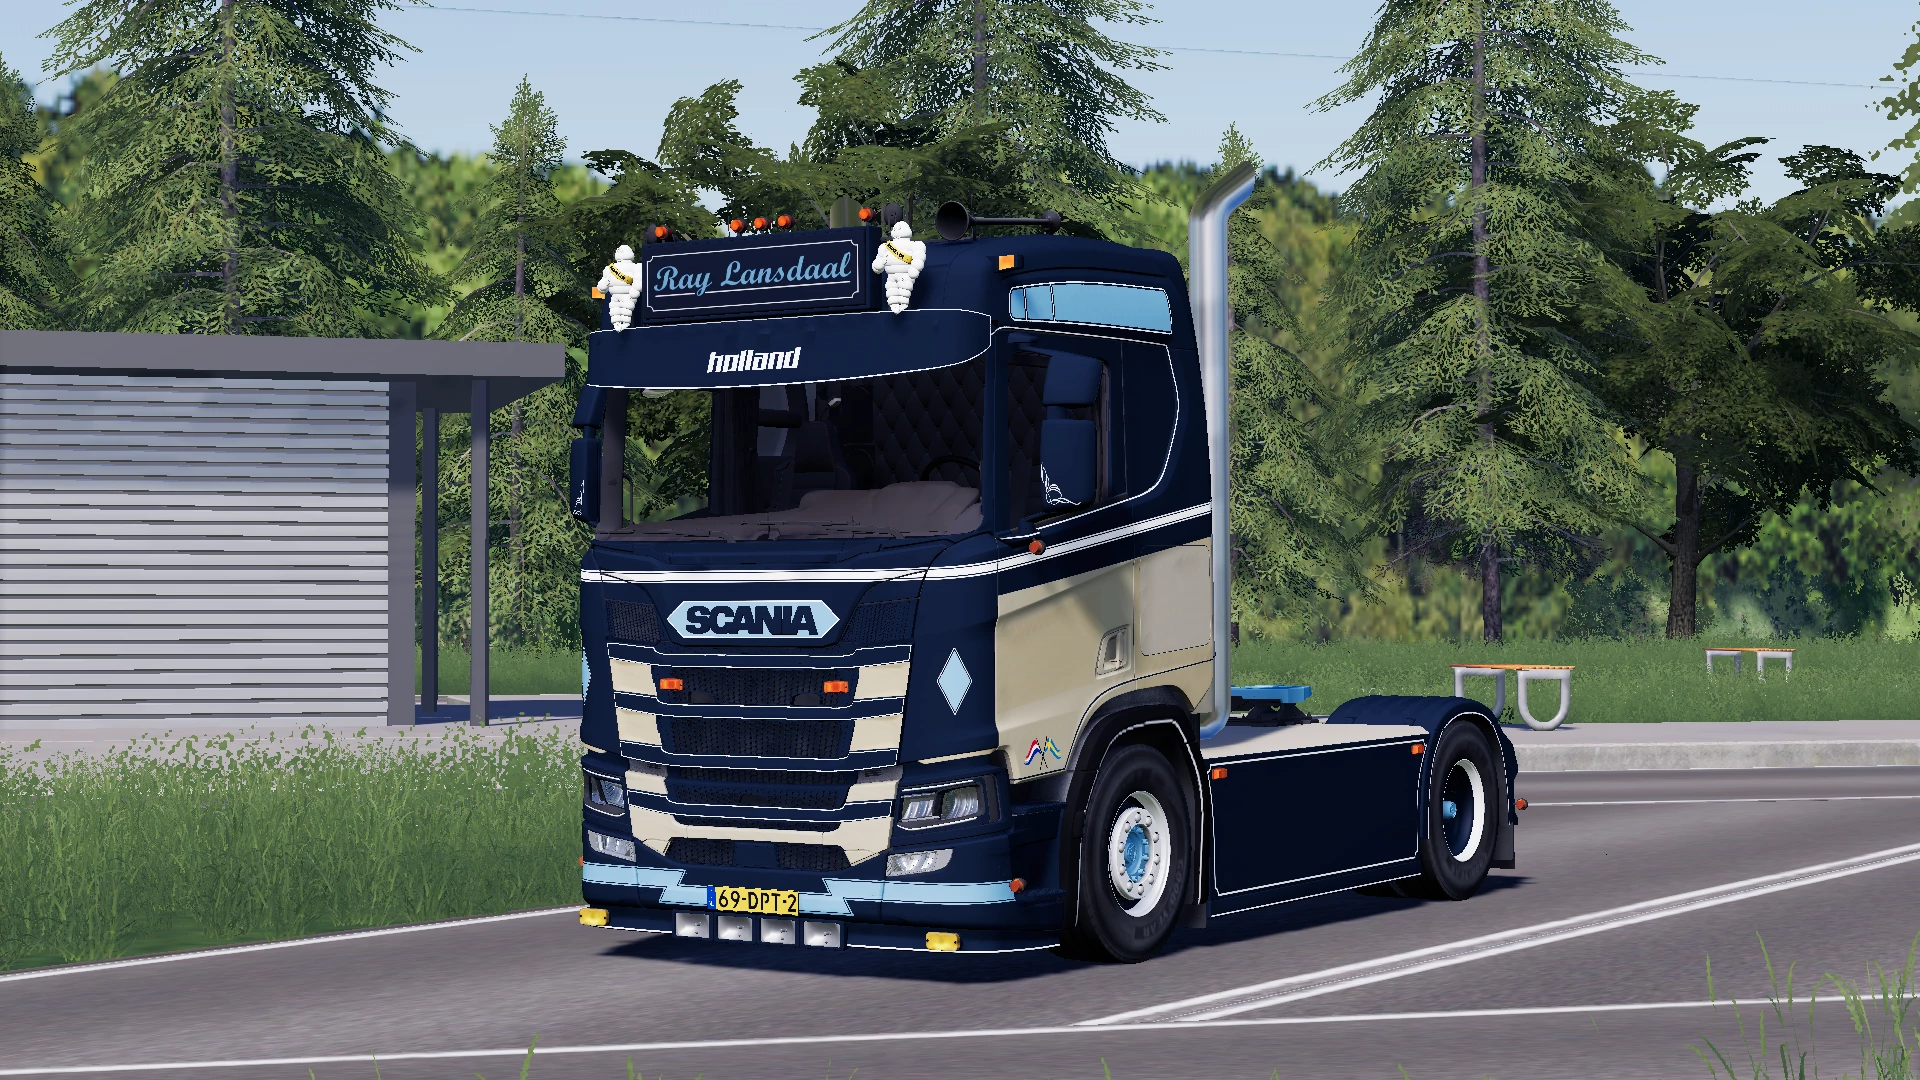 scania of Roy Lansdaal